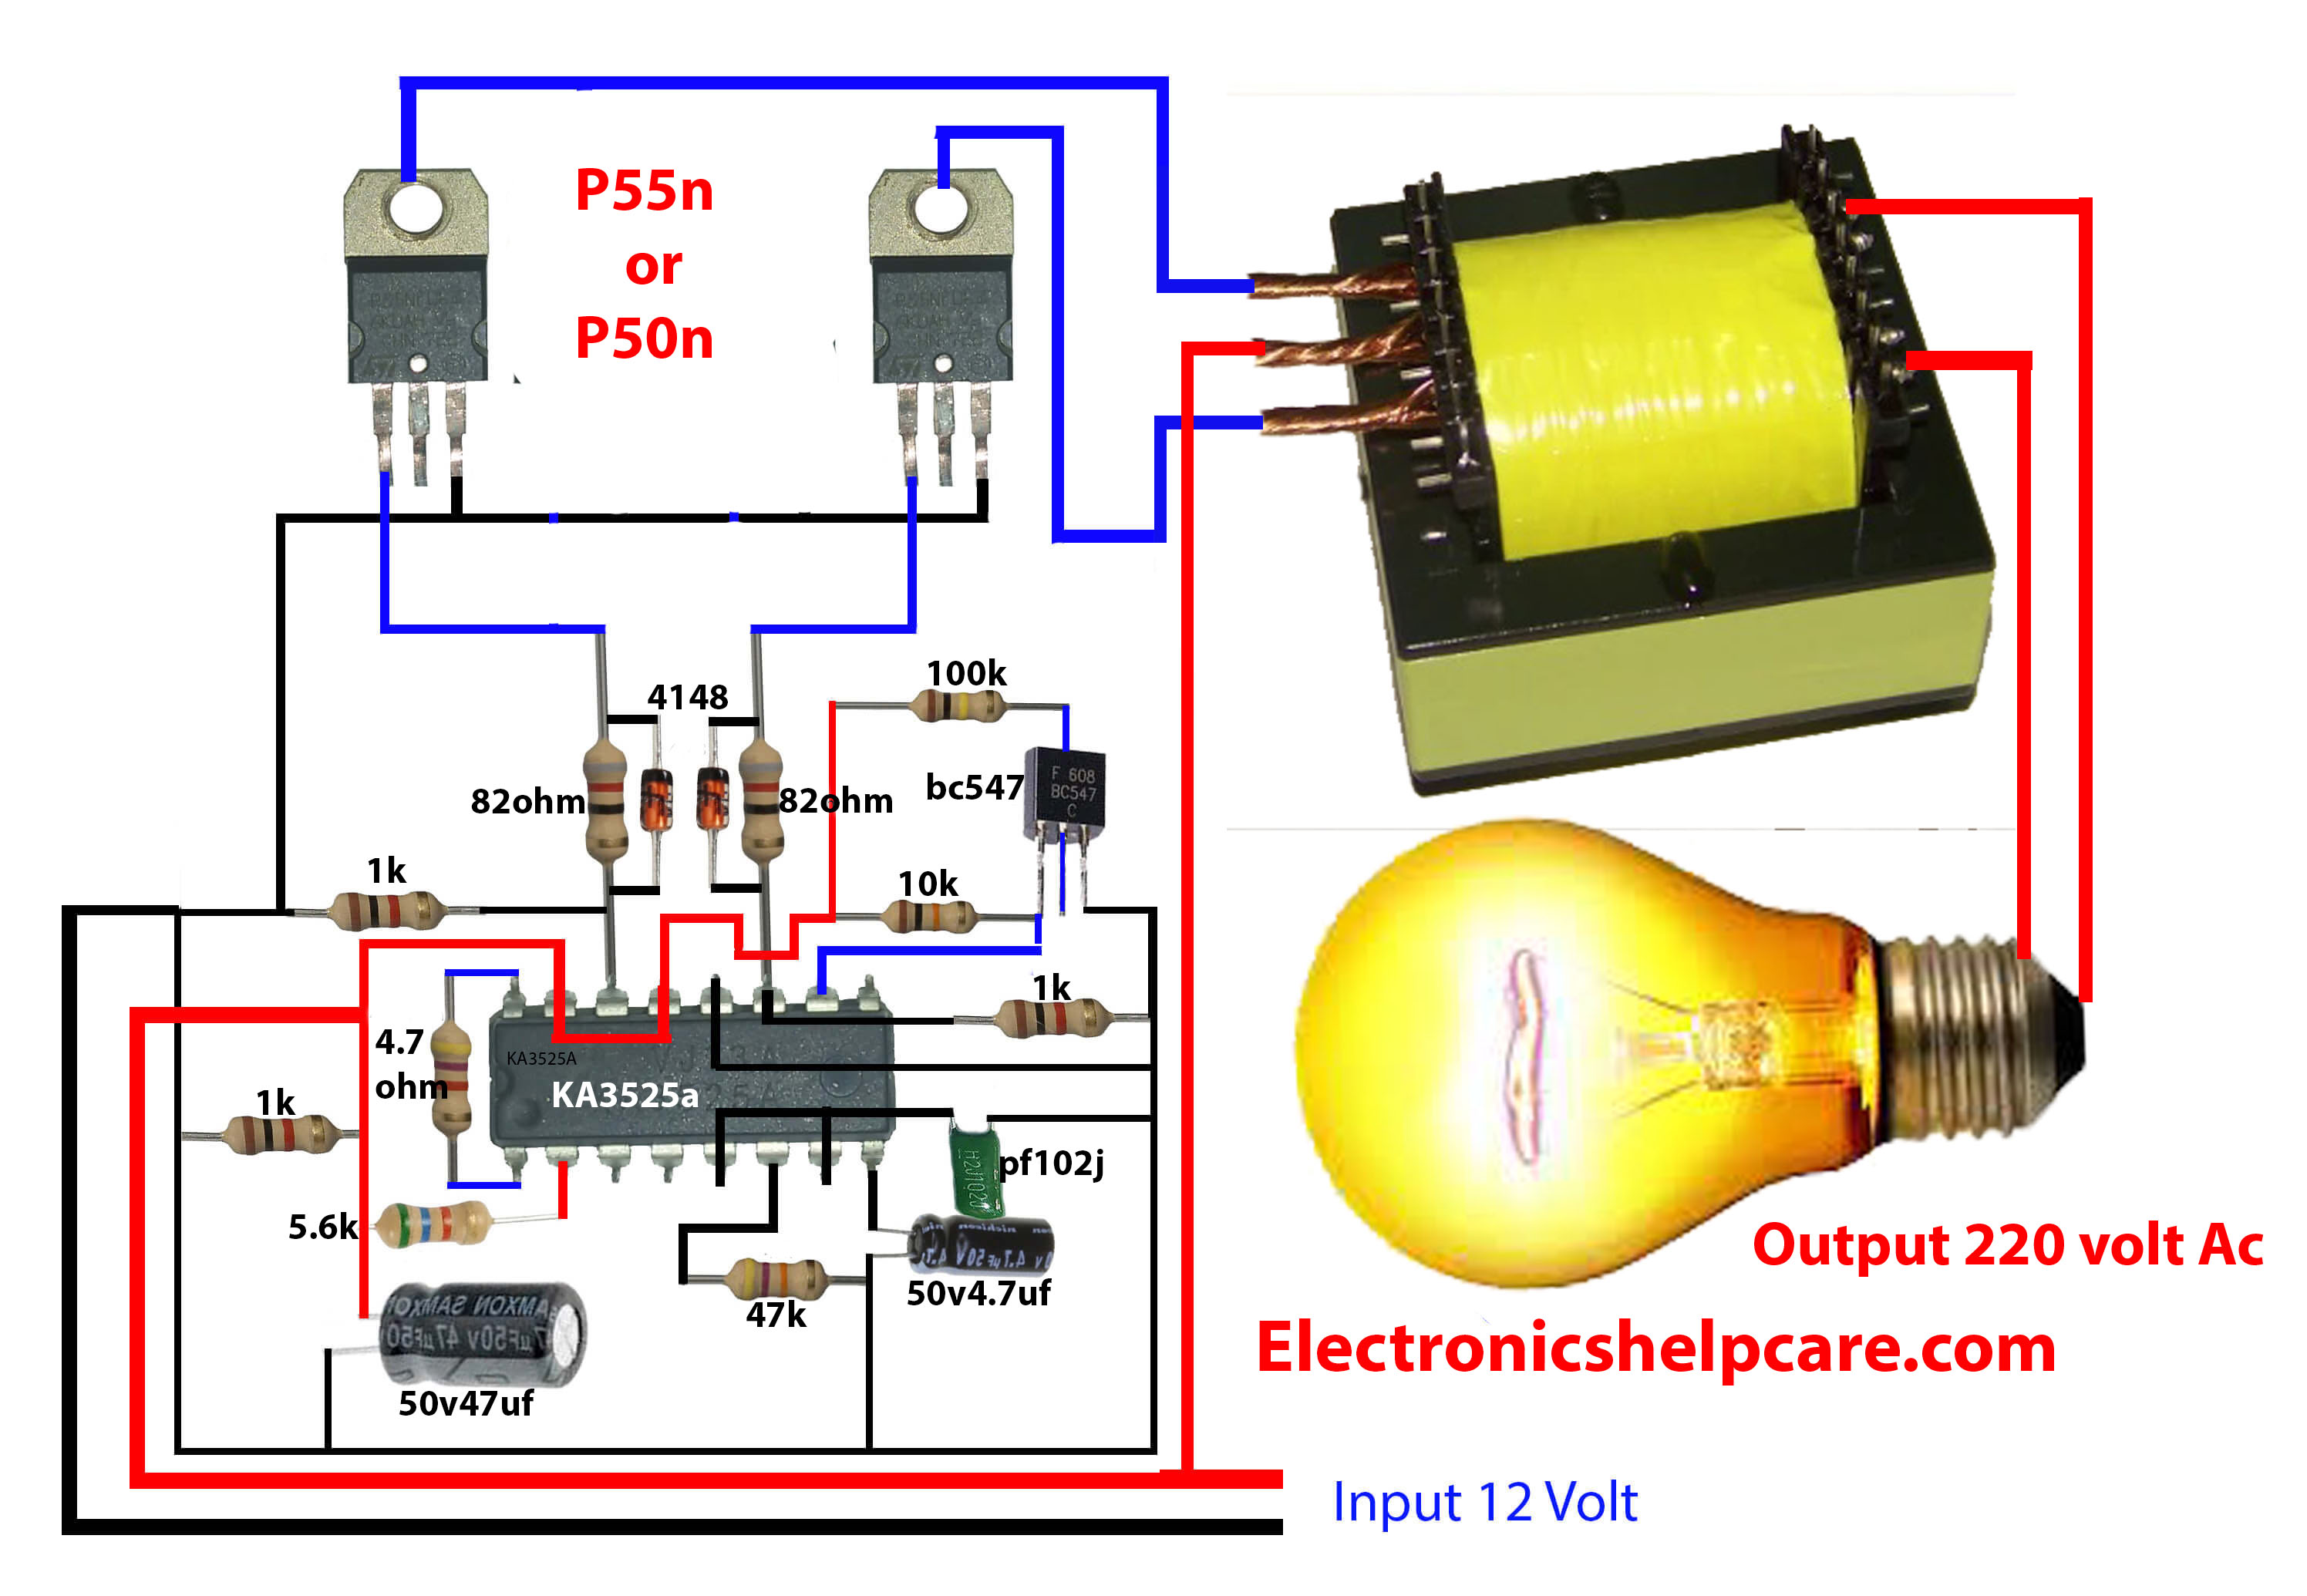 how to make inverter circuit?